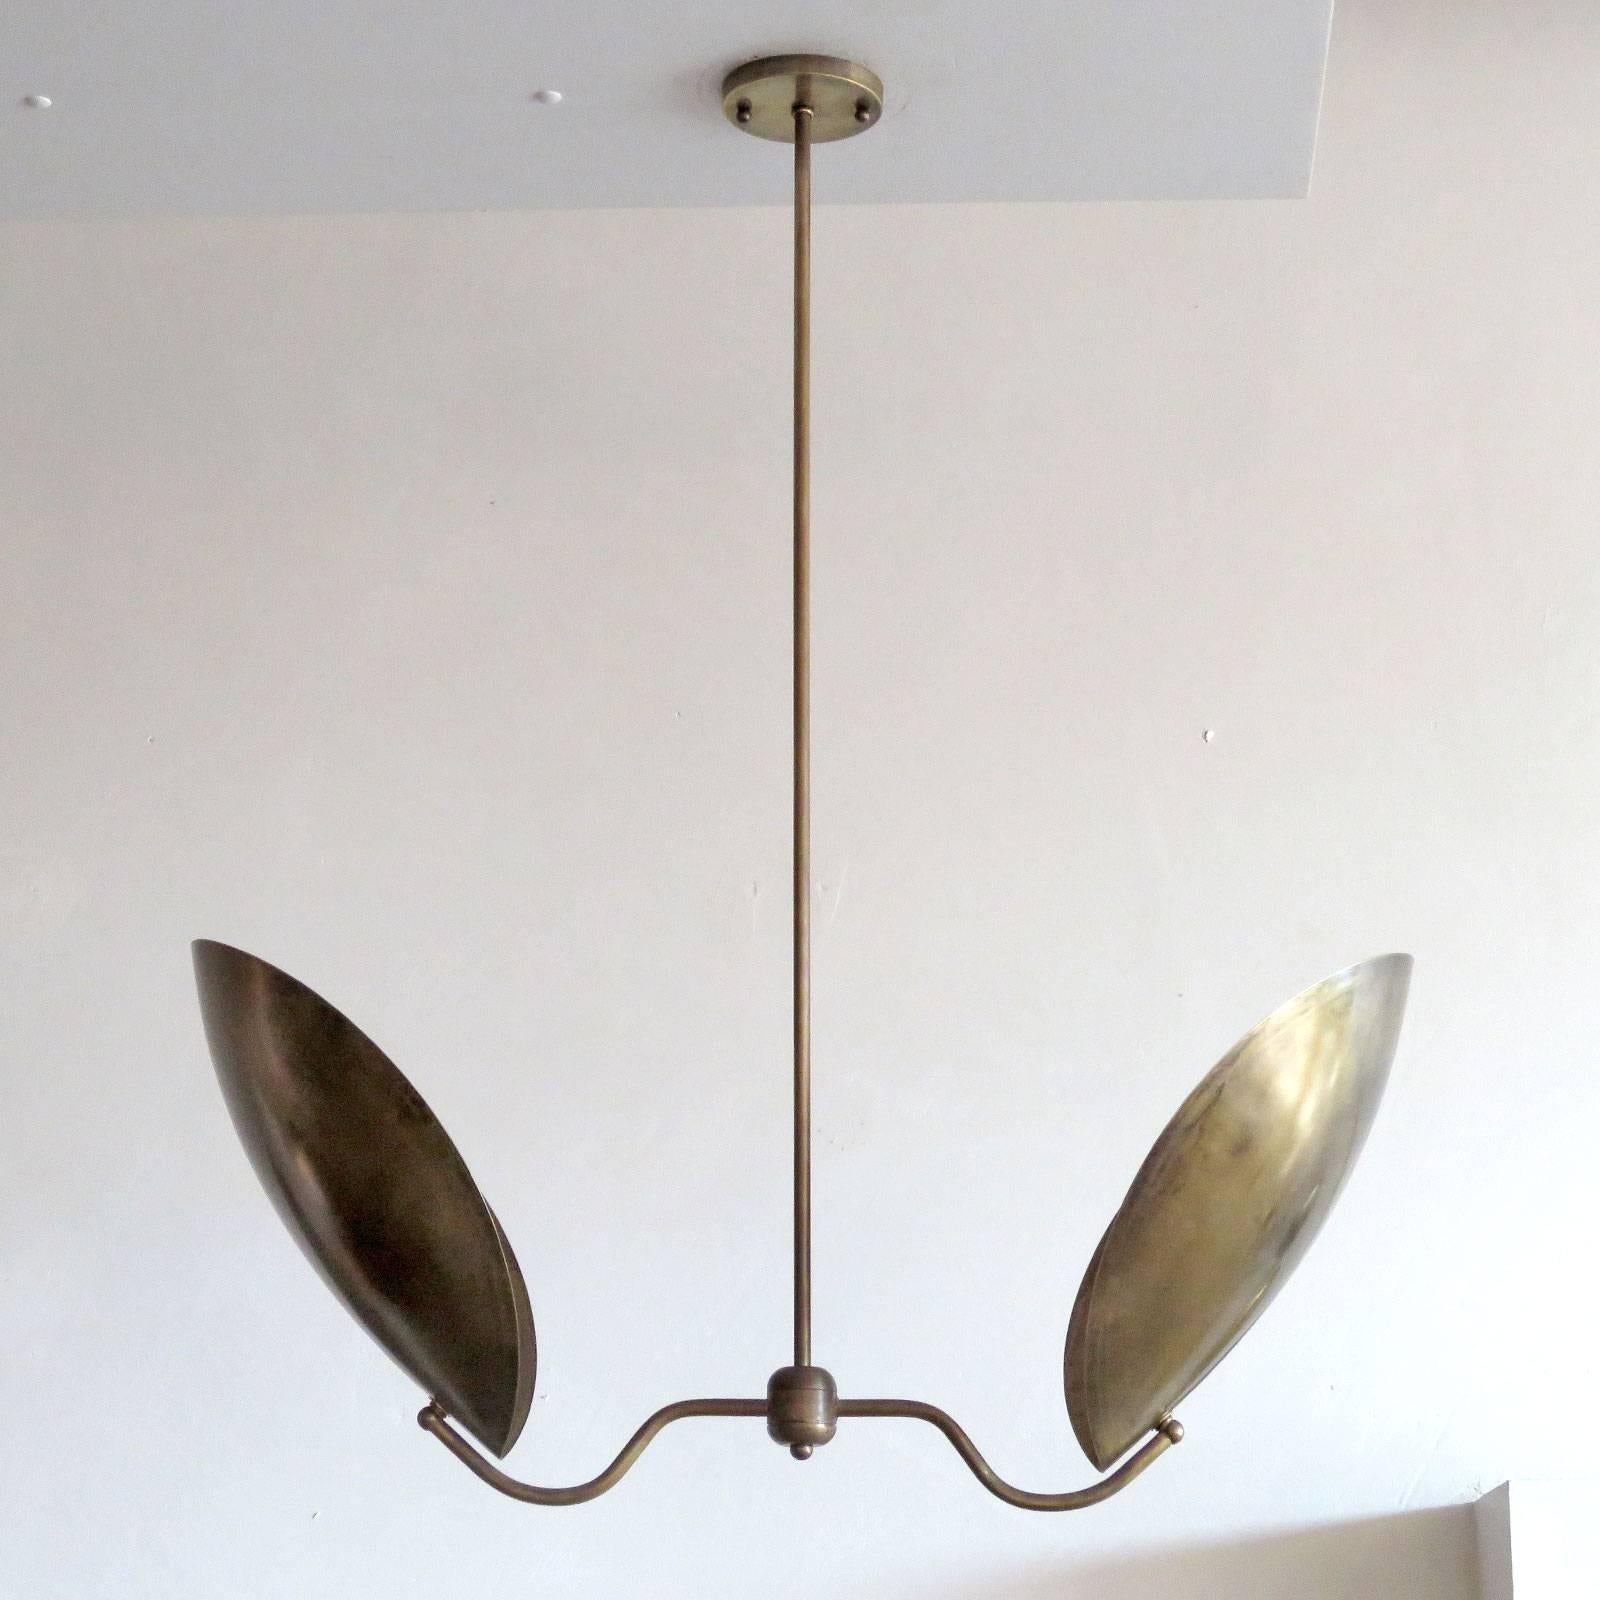 Elegant two shield pendant 'Chiton-2' designed by Gallery L7, handcrafted and finished in Los Angeles from American brass. Reminiscent of stag beetle armor, in an aged raw brass finish, overall height can be customized ( 20in + ). Two E26 sockets